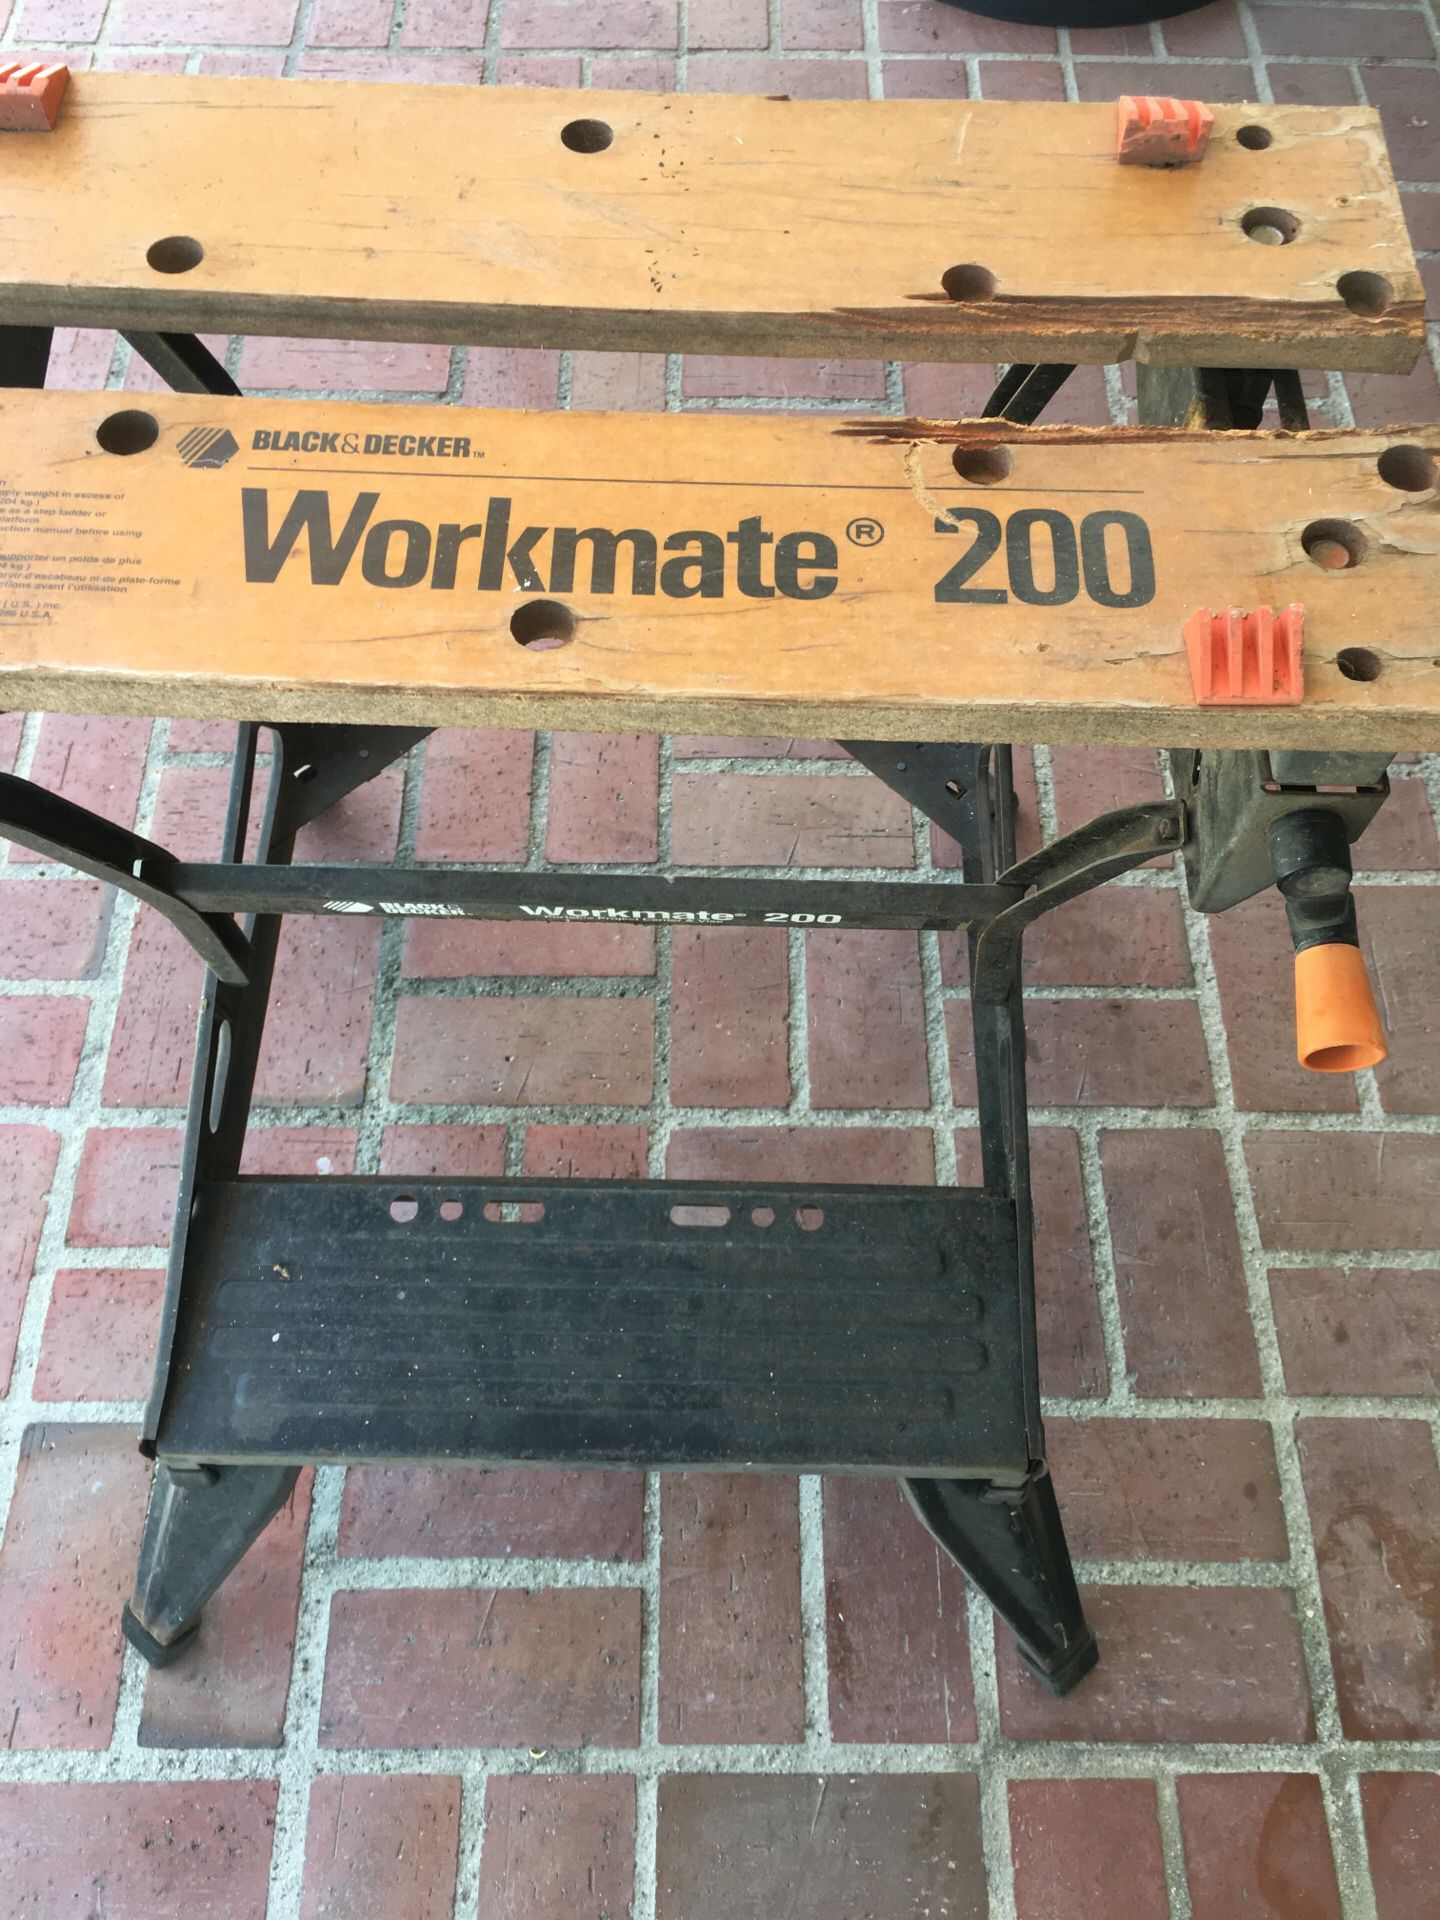 Black & Decker Workmate 200 Portable Project Table